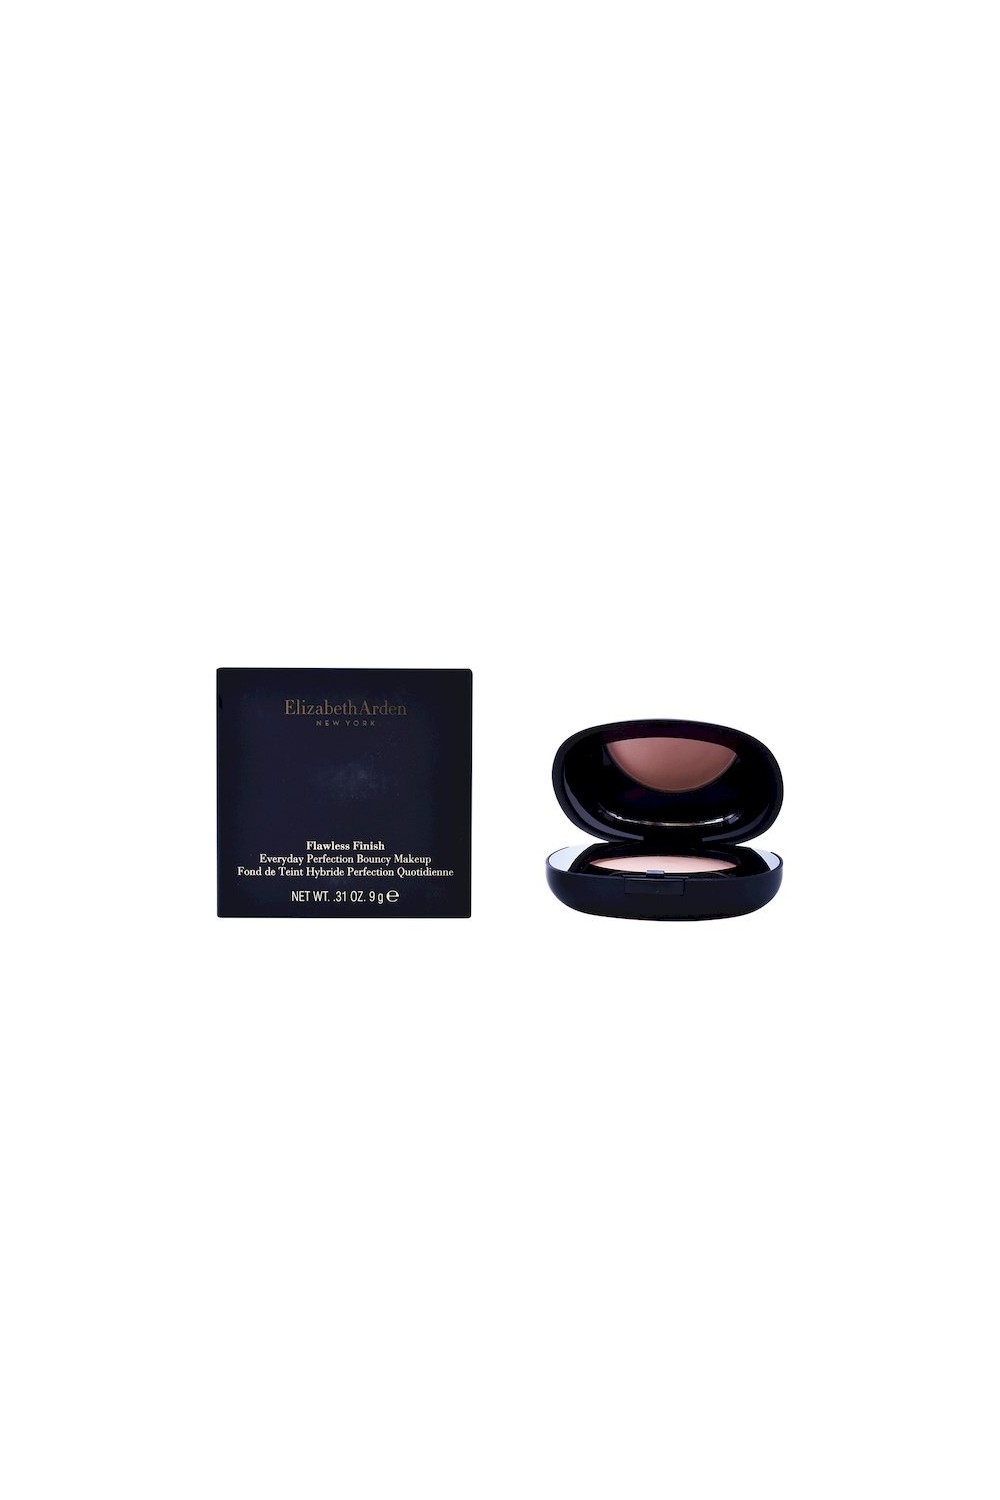 Elizabeth Arden Flawless Finish Everyday Perfection Bouncy Makeup 05 Cream 9g